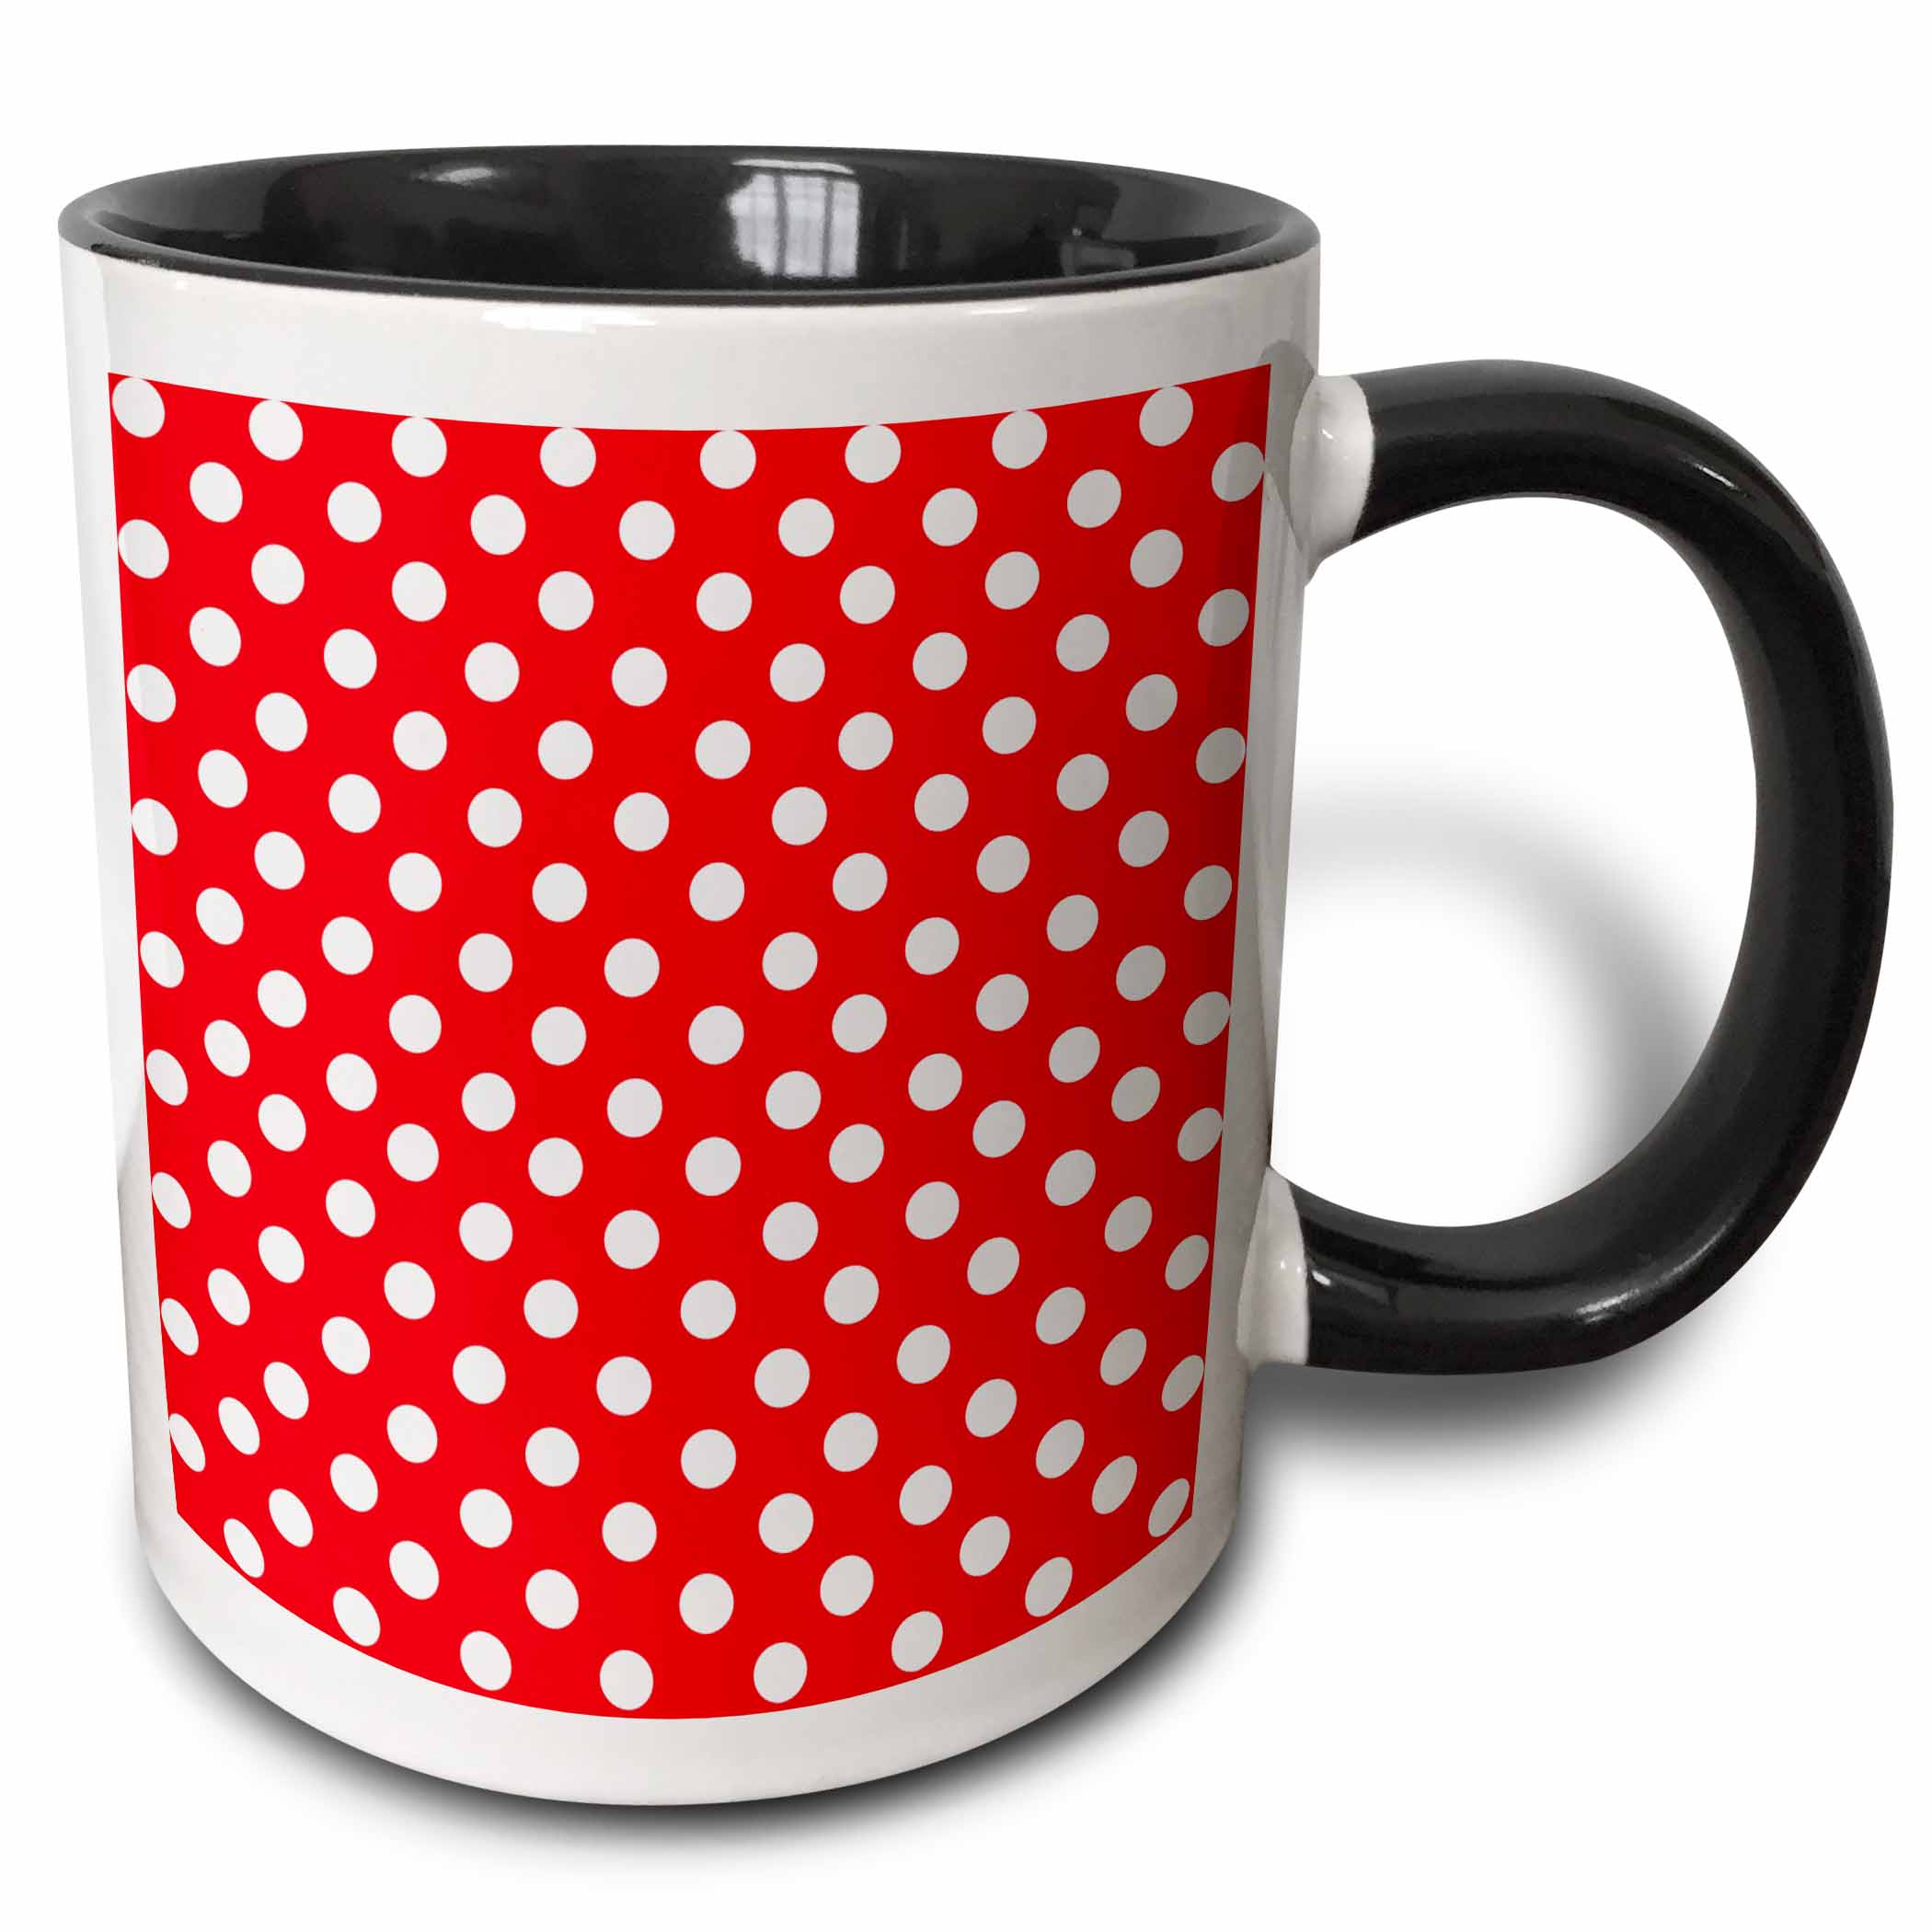 3dRose White Polka Dots on Red - Classic Retro 50s style cute spots pattern - Two Tone Black Mug, 11-ounce - image 1 of 3